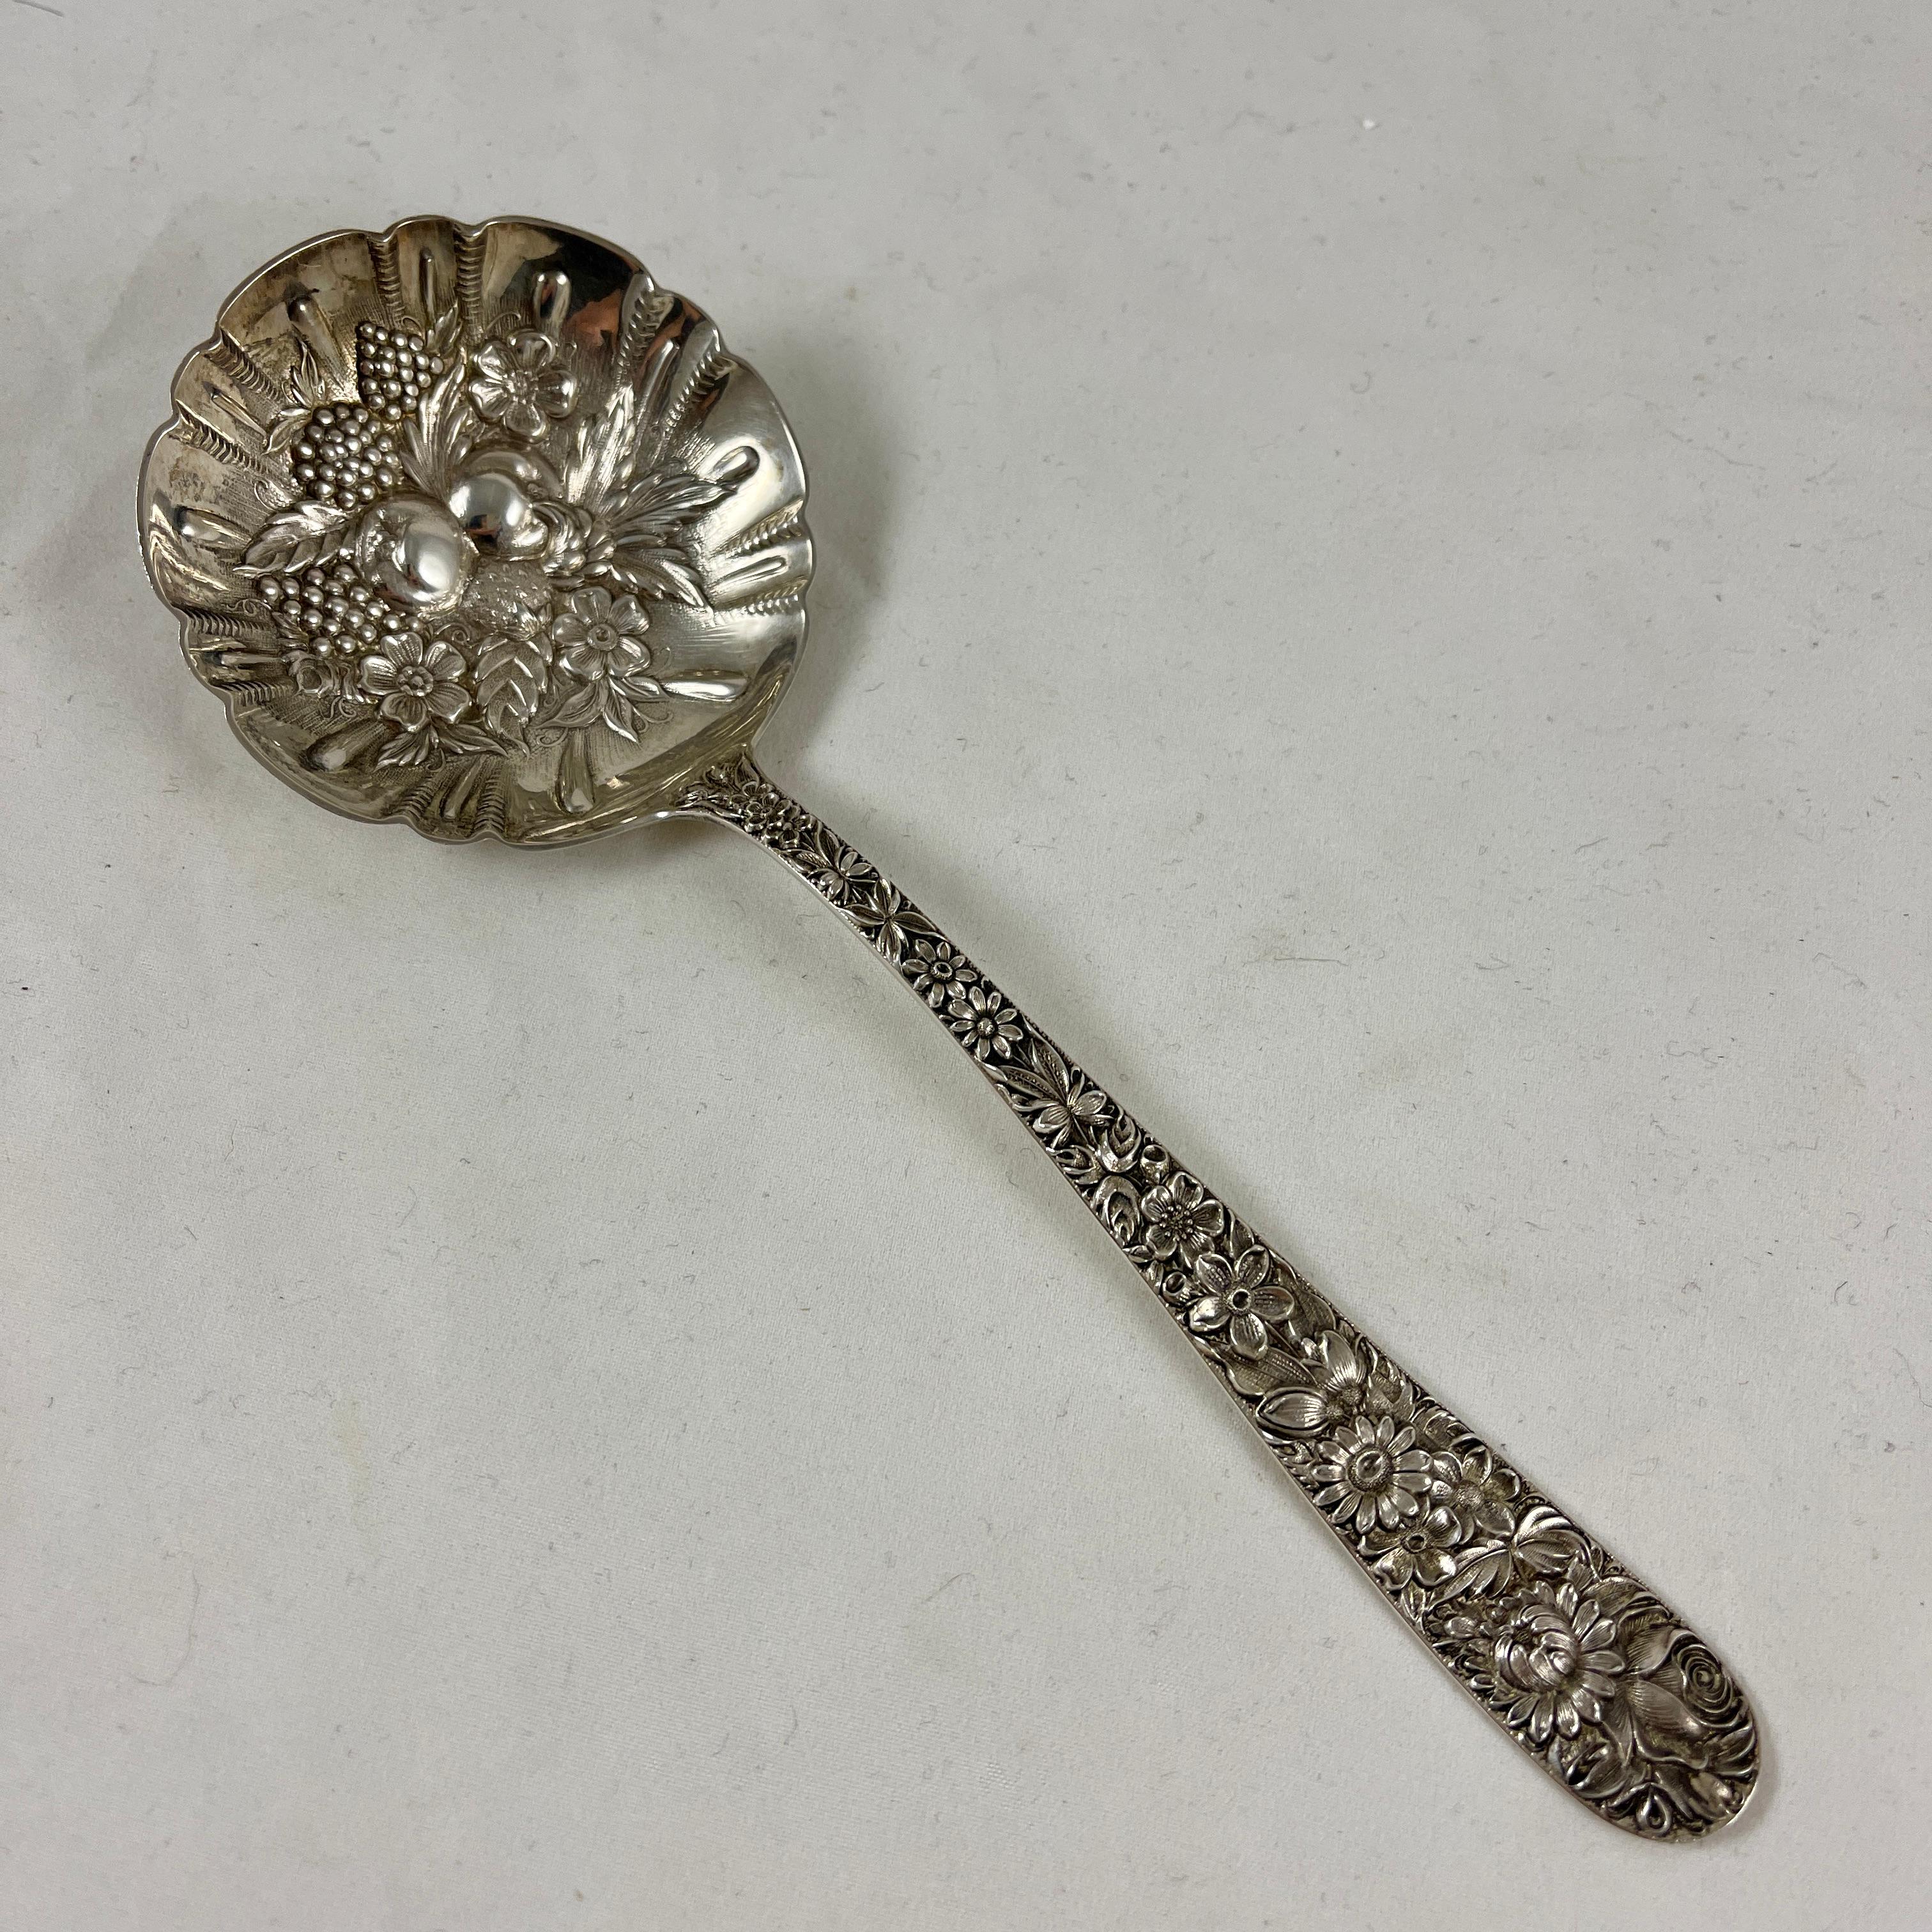 GOOD CONDITION KIRK & SON ROSE STERLING SILVER SERVING SPOON Details about   S 